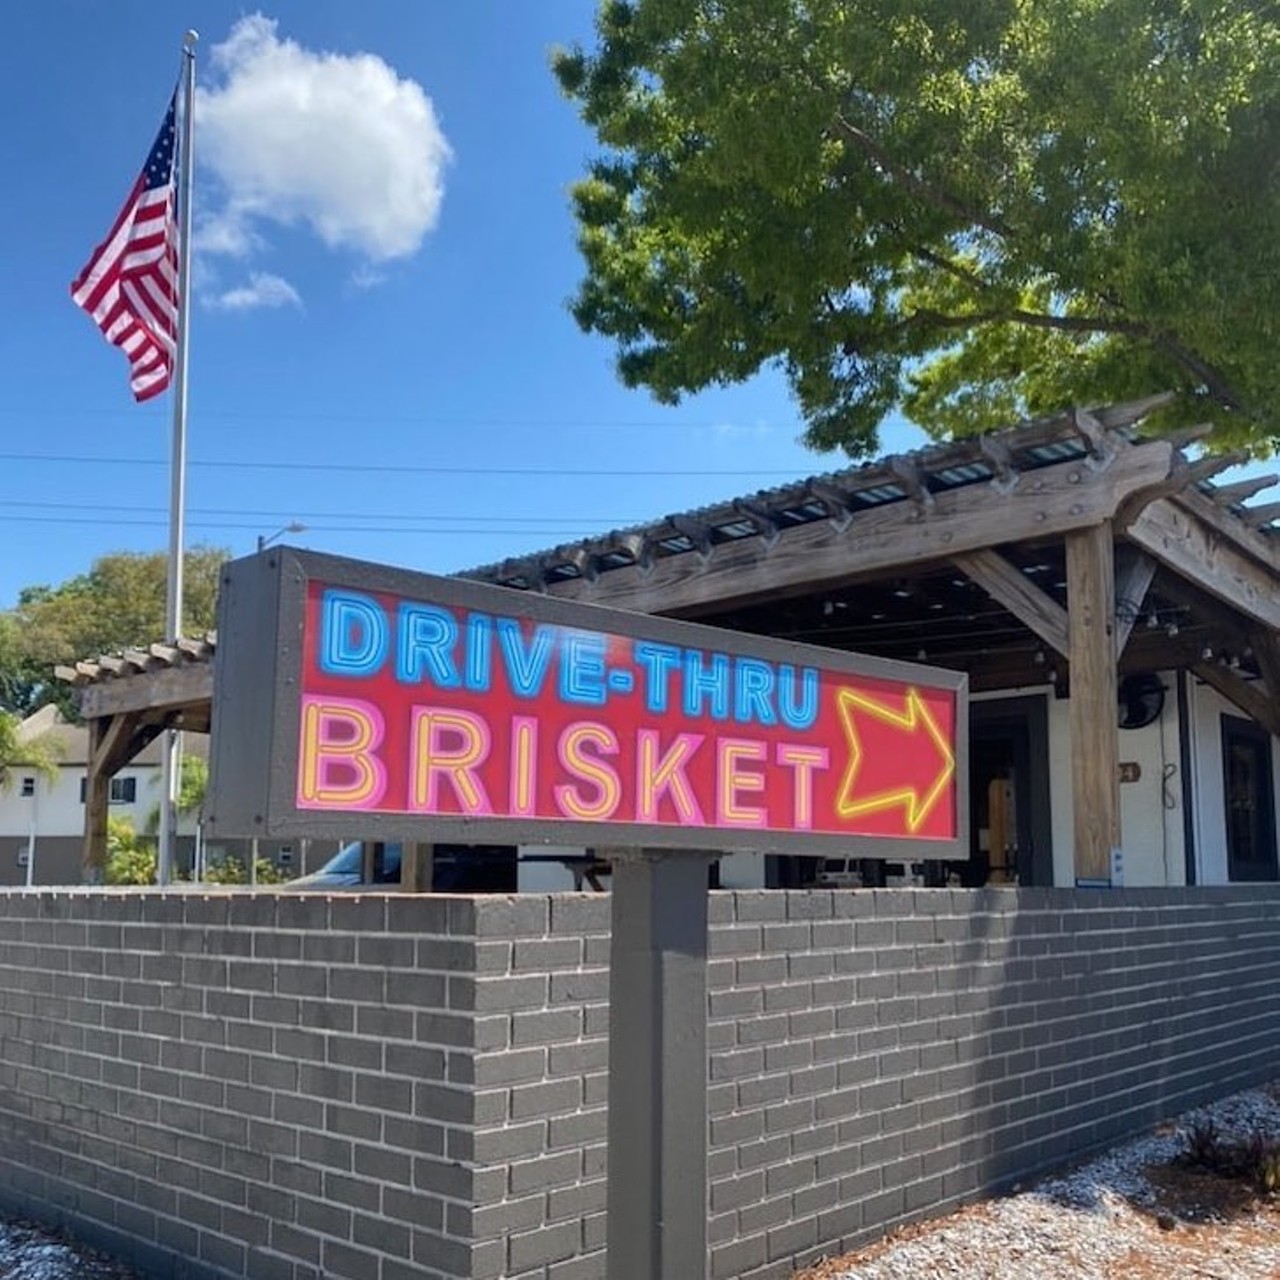 Brisket Shoppe
4004 Henderson Blvd., Tampa, (813) 605-4005
Dining options for this barbeque shop are drive-thru, pick-up, or sitting outside at a few tables. Located in the second location of retail shop Grill & Provisions, the Shoppe is only open three days a week, Thurs.-Sat., and closes when they sell out&#150;so go early.